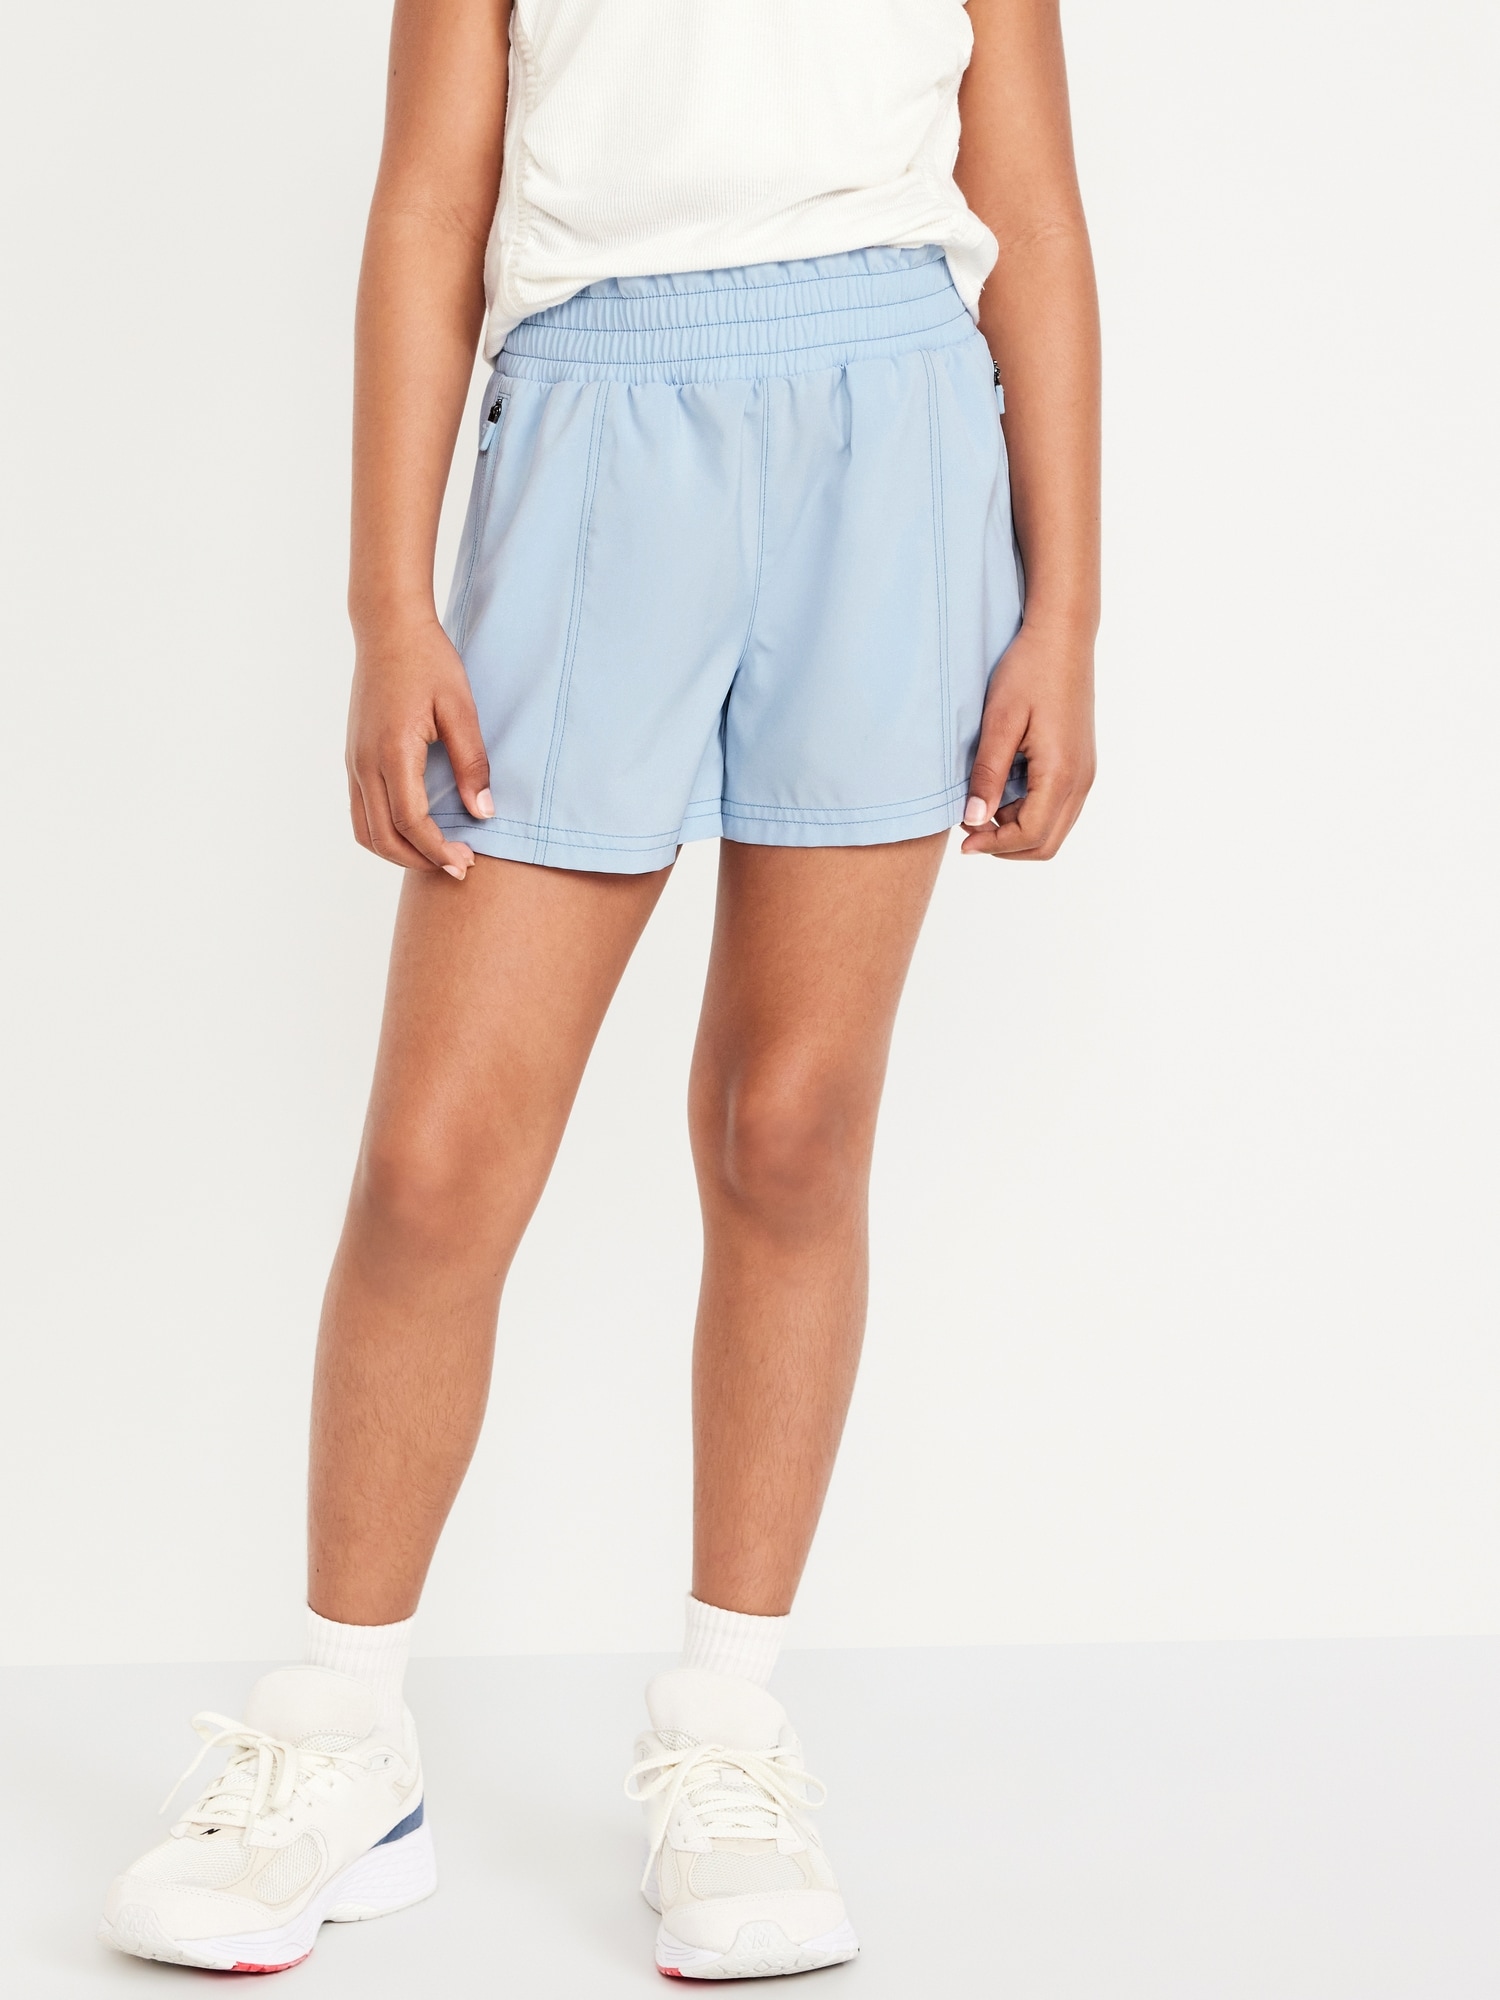 Old Navy High-Waisted StretchTech Zip-Pocket Shorts for Girls